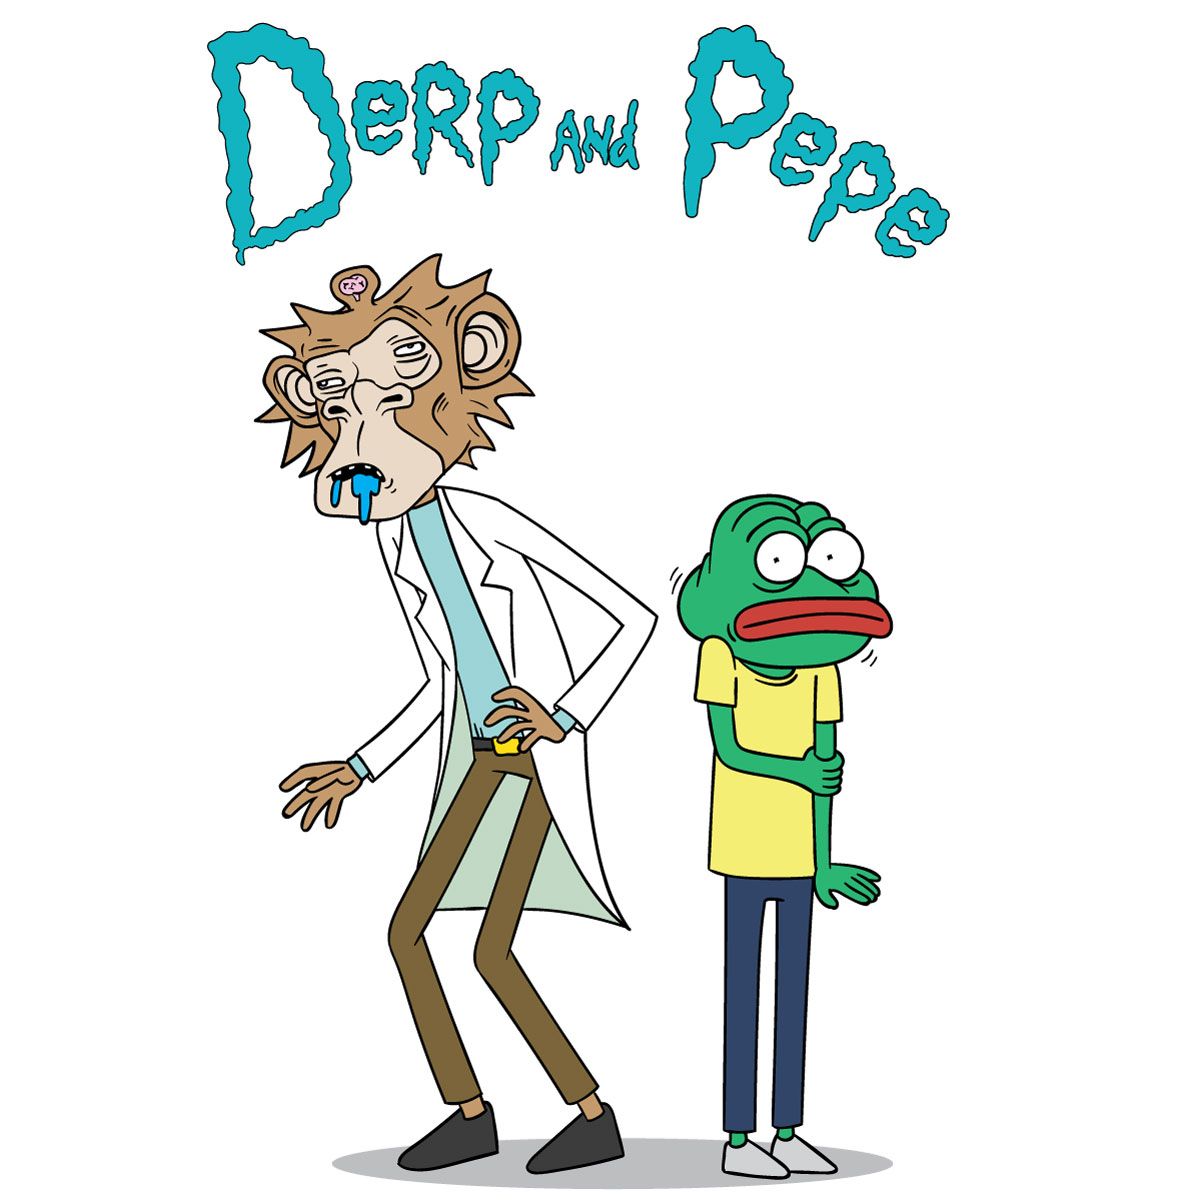 DXDERPNPEPE